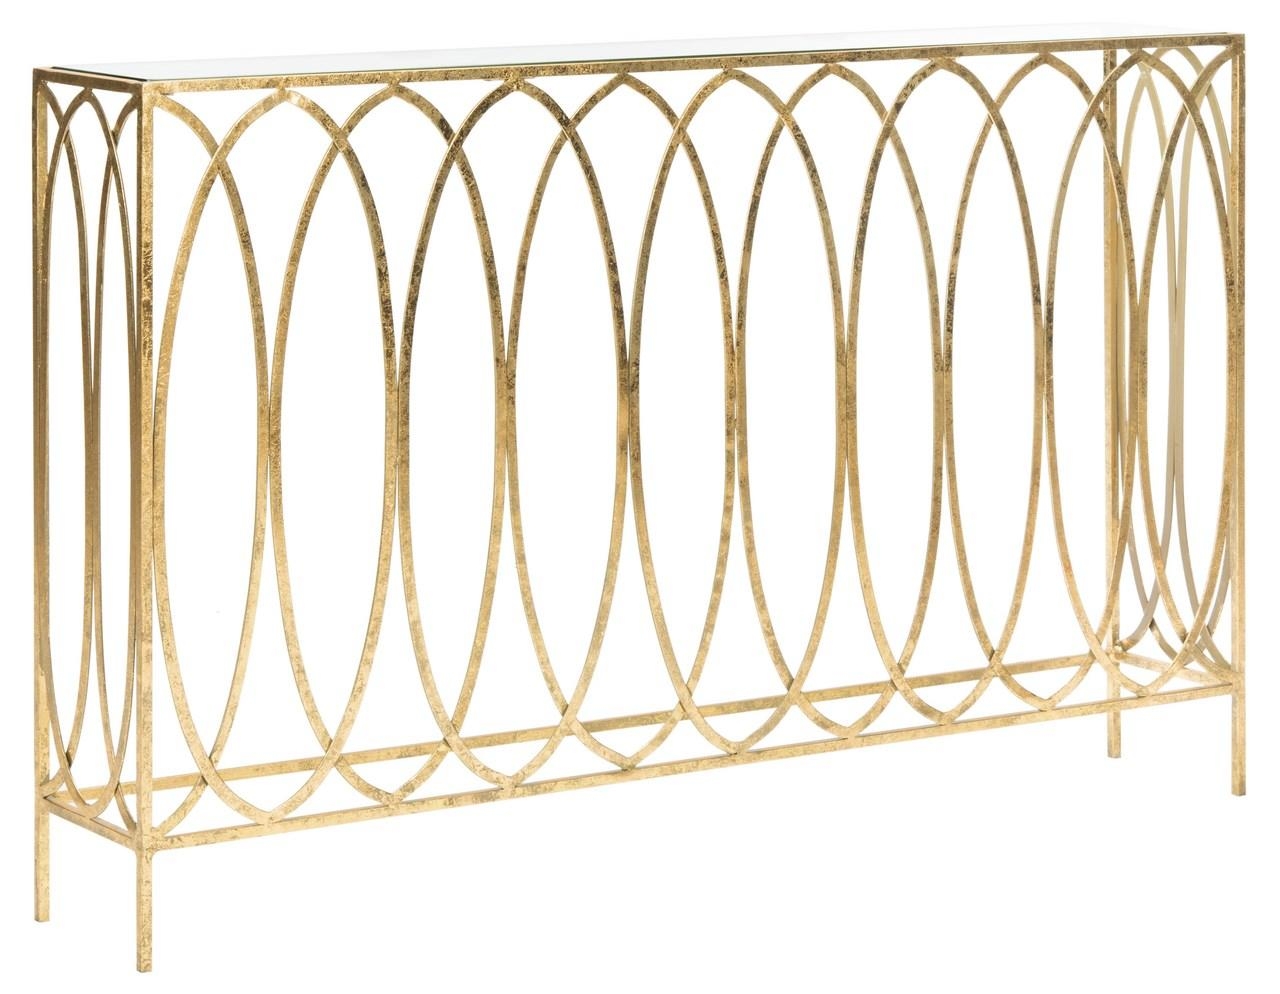 Carina Oval Ringed Console Table - Gold - Safavieh - Image 1